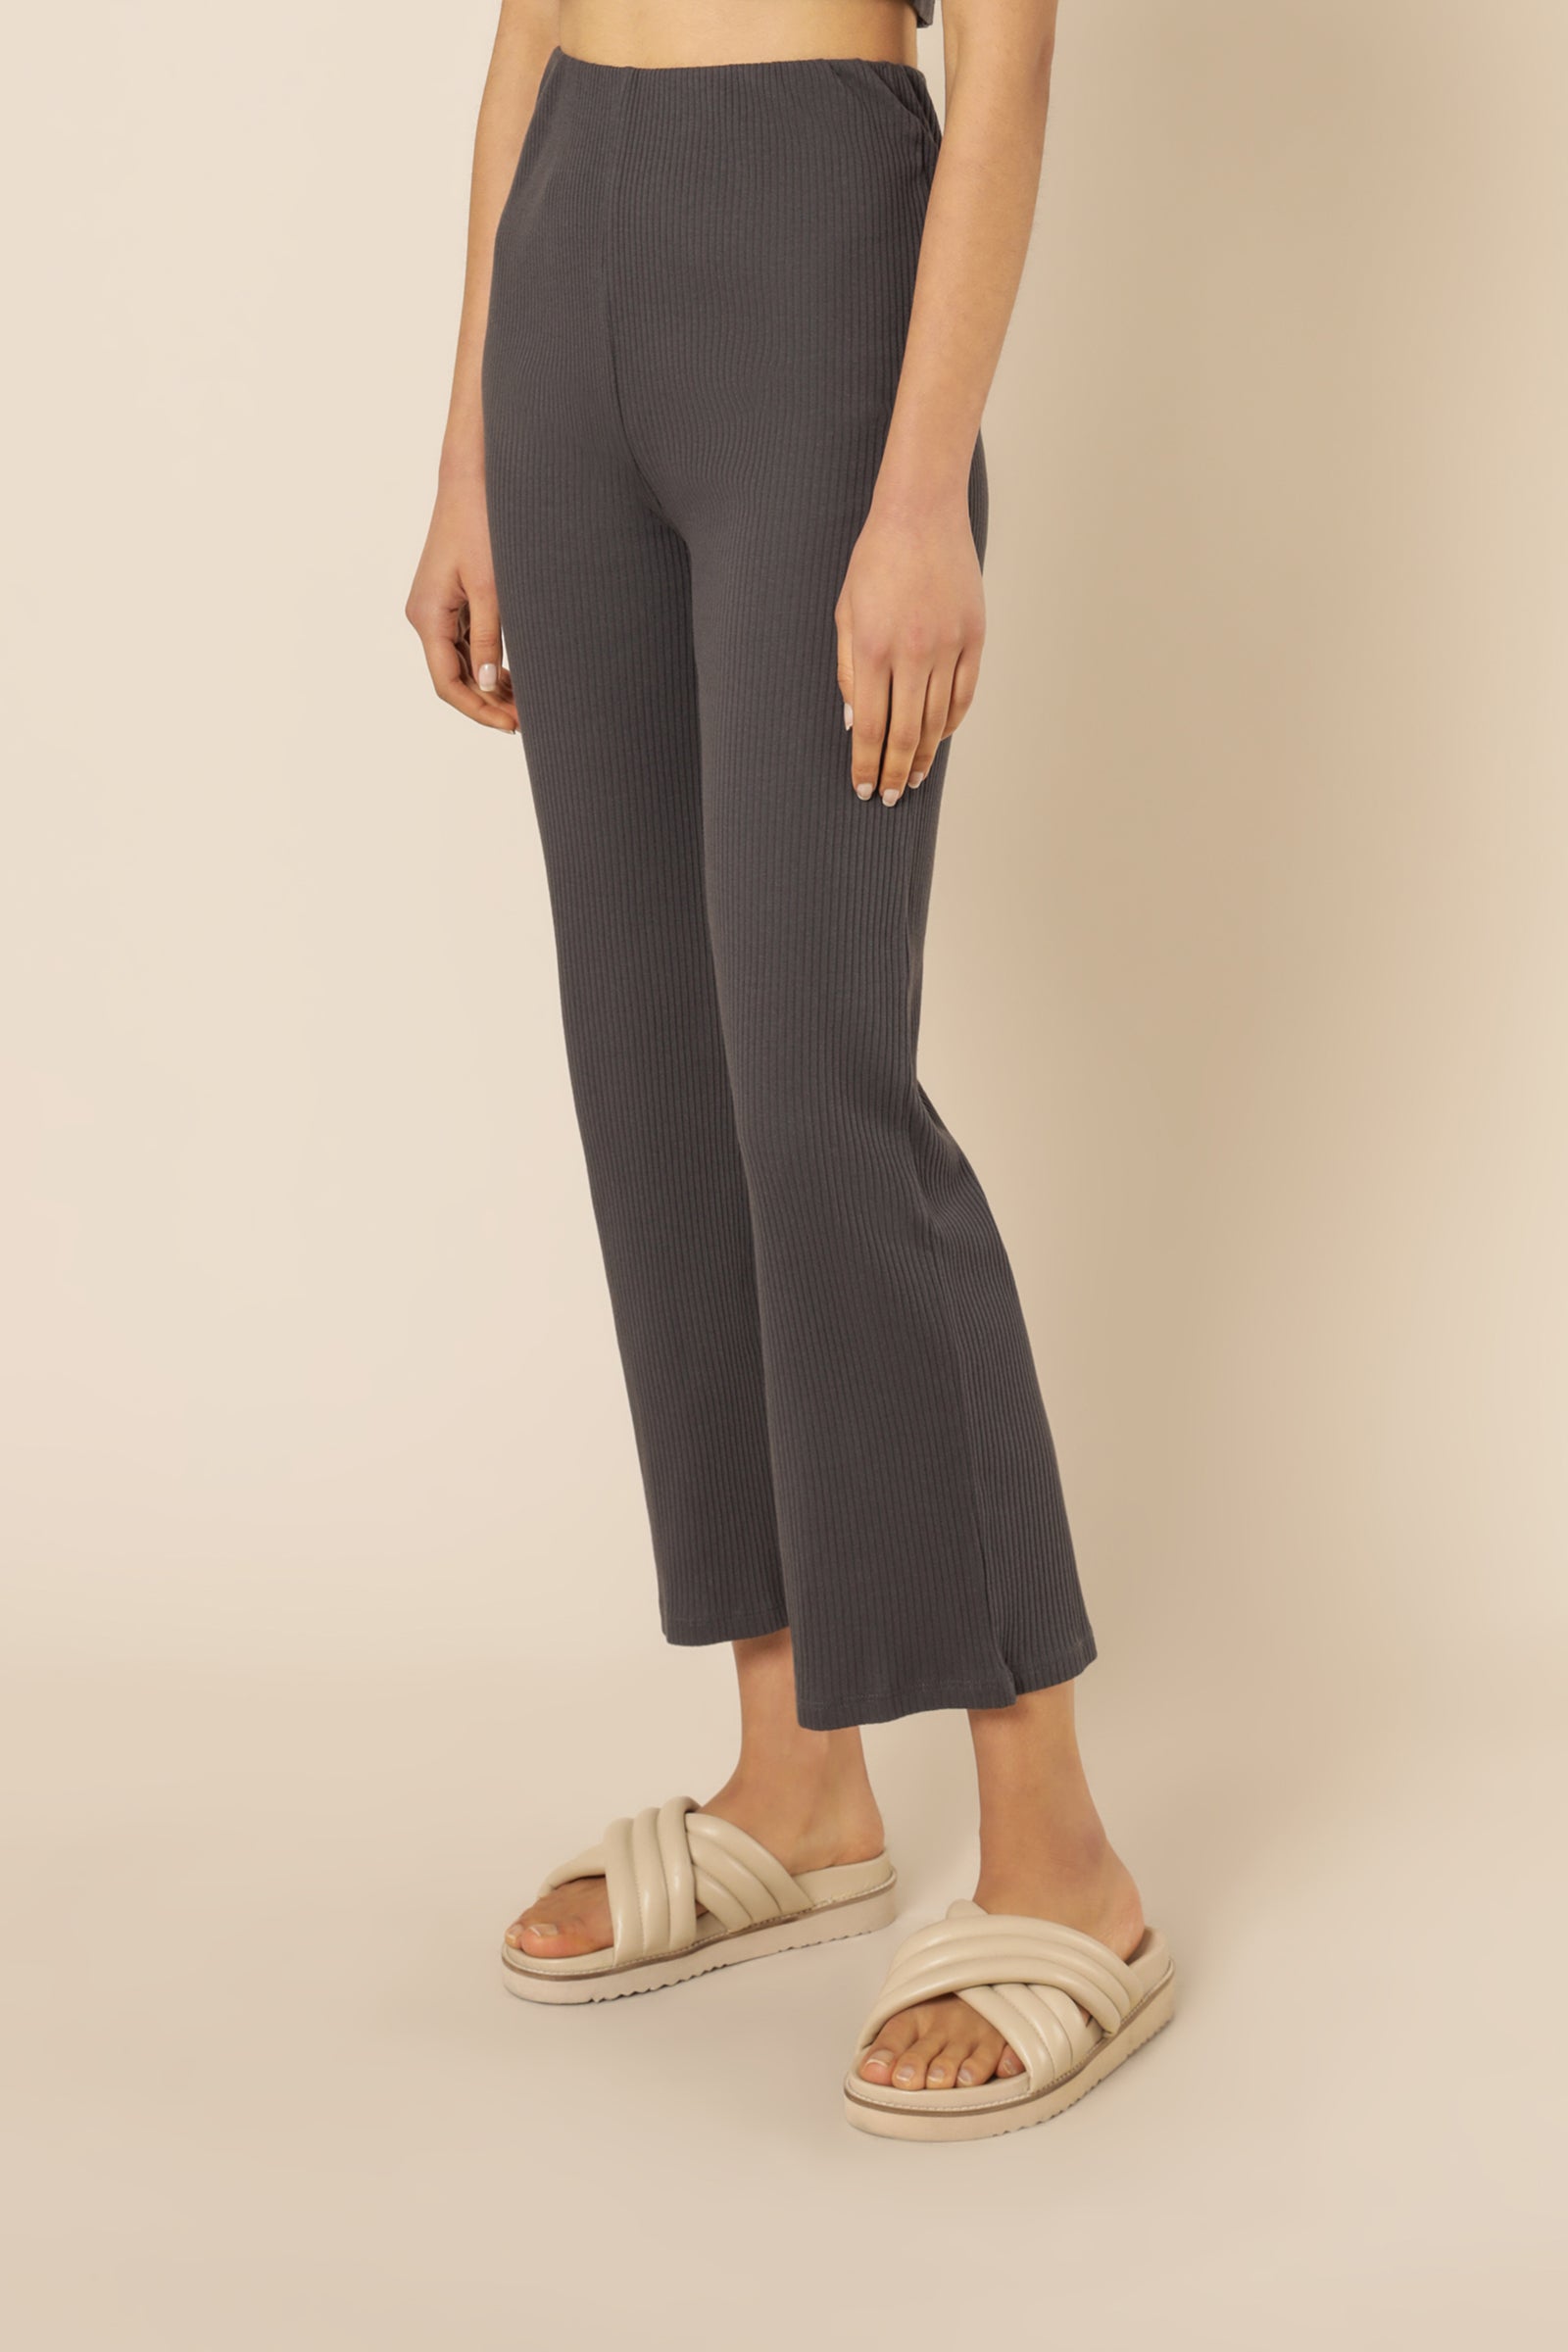 Nude Lucy Nude Ribbed Lounge Culotte Coal Pants 